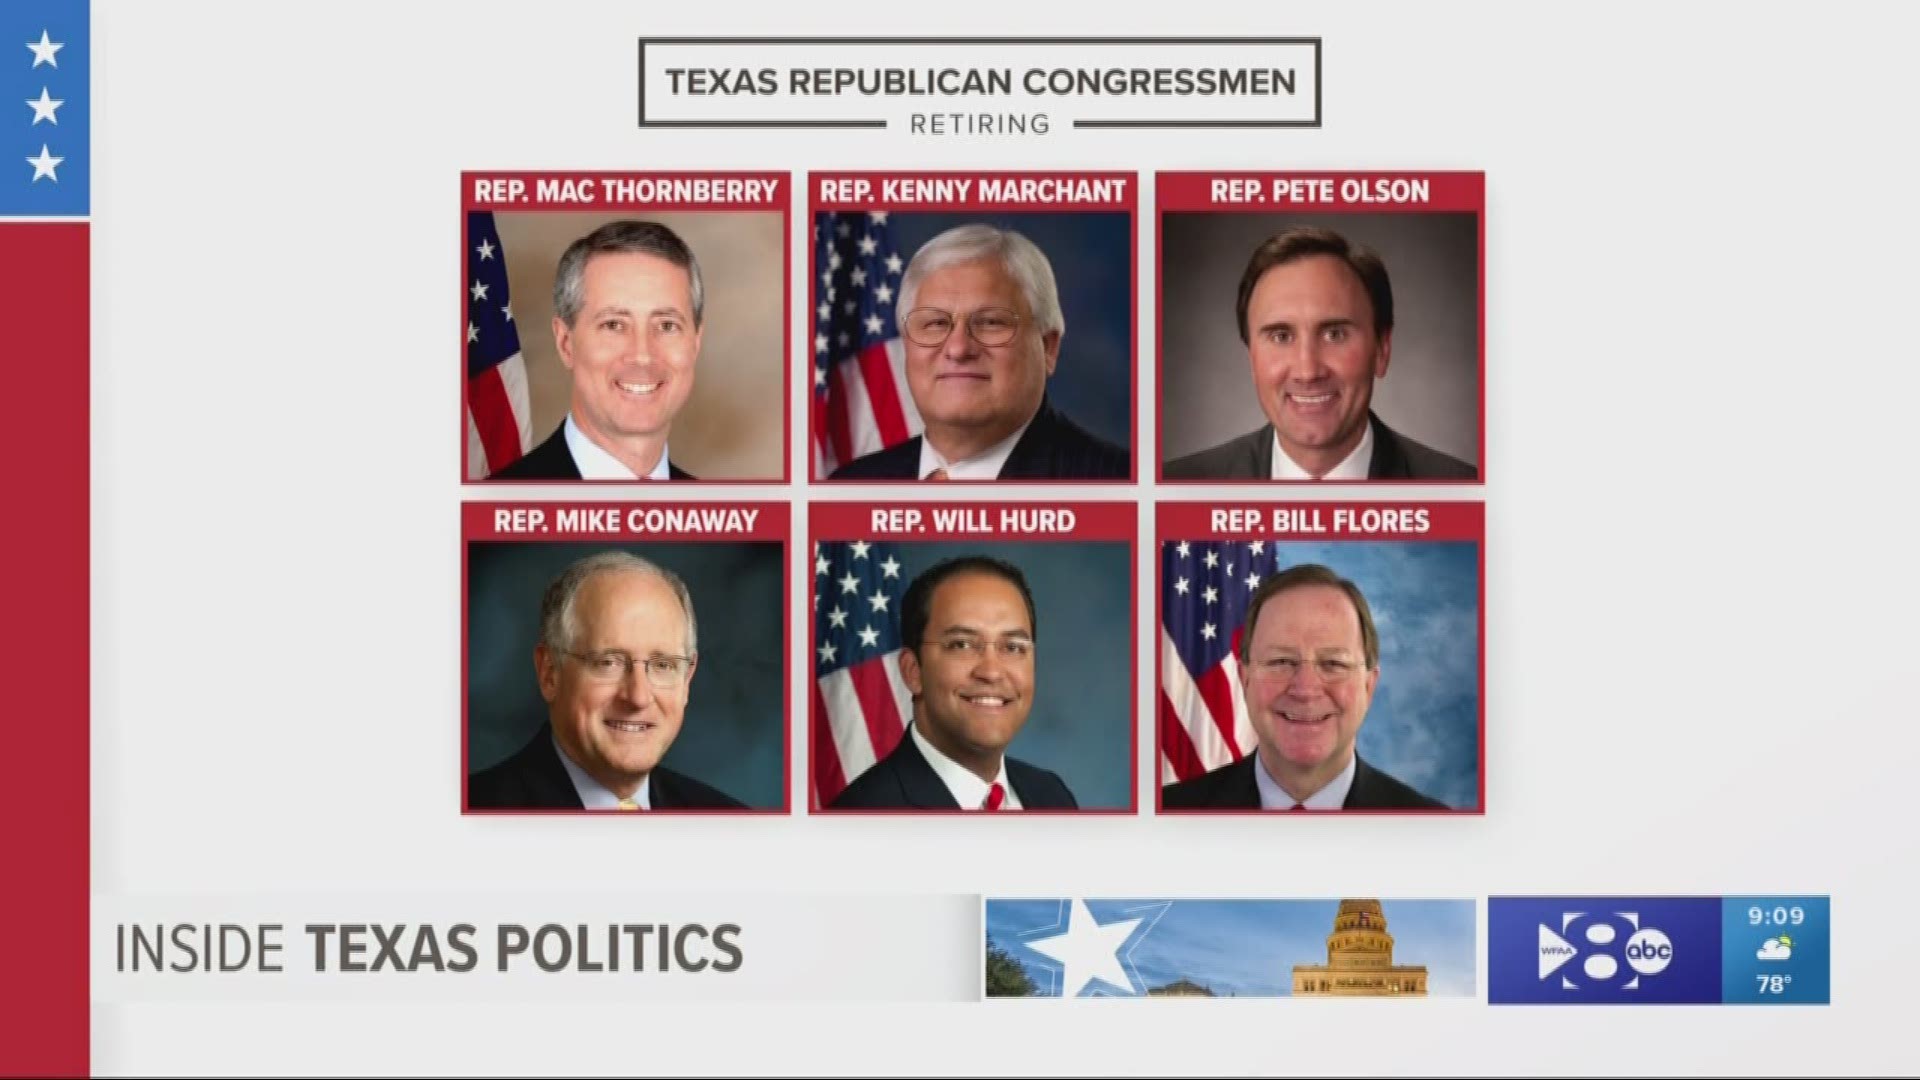 The number is now up to six. That's how many Texas Congressmen will not run for re-election.